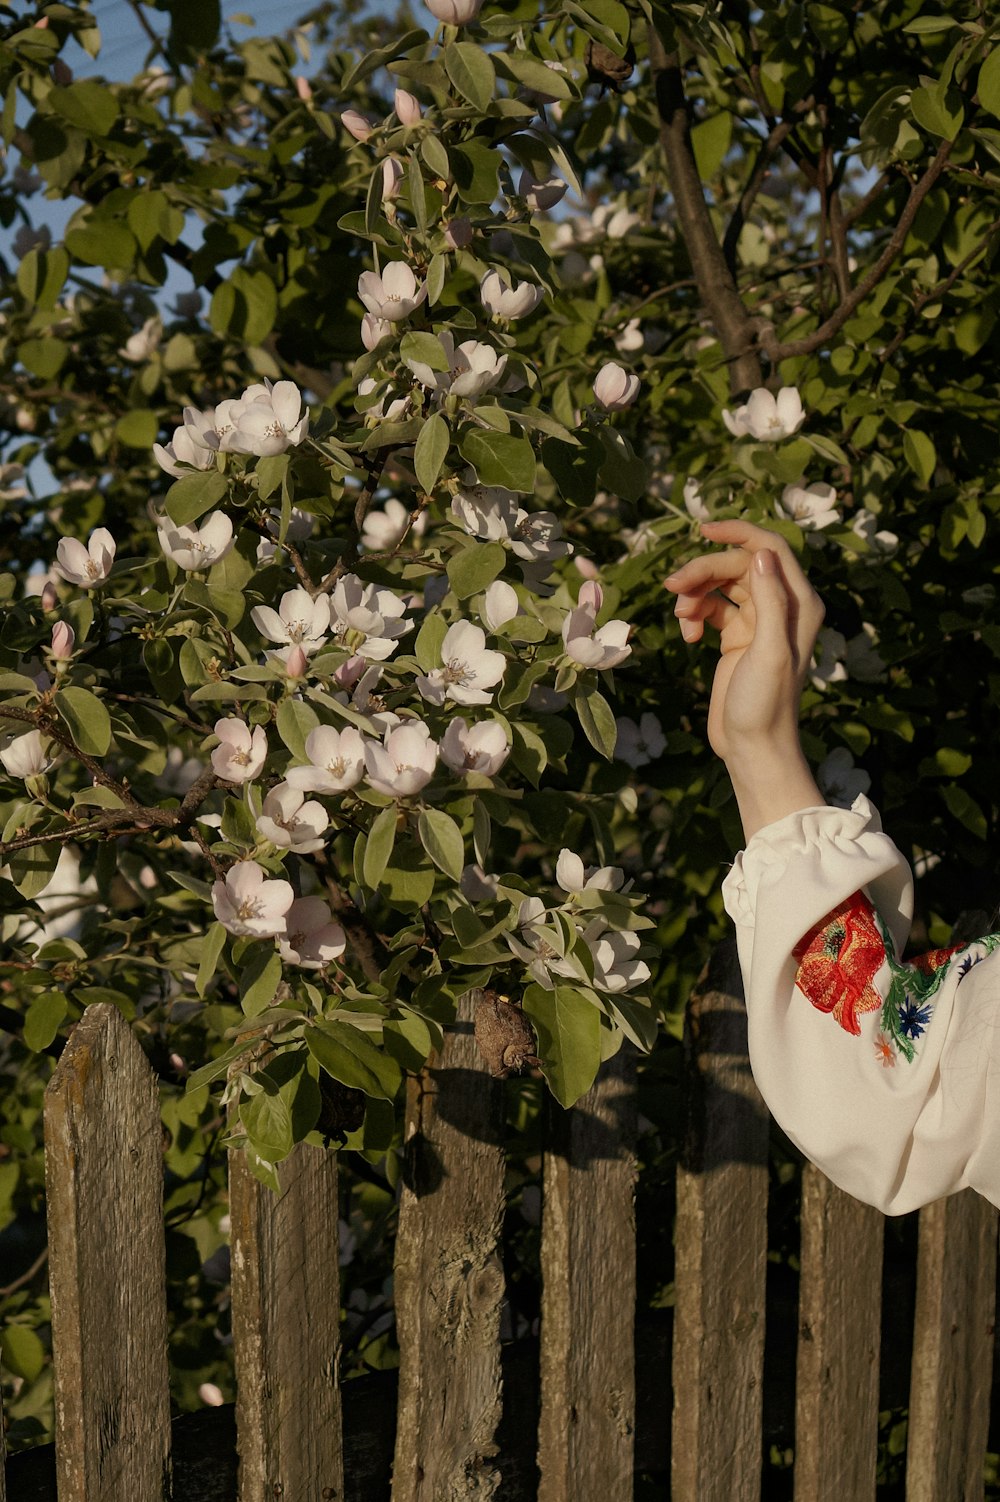 a person holding a tree with white flowers